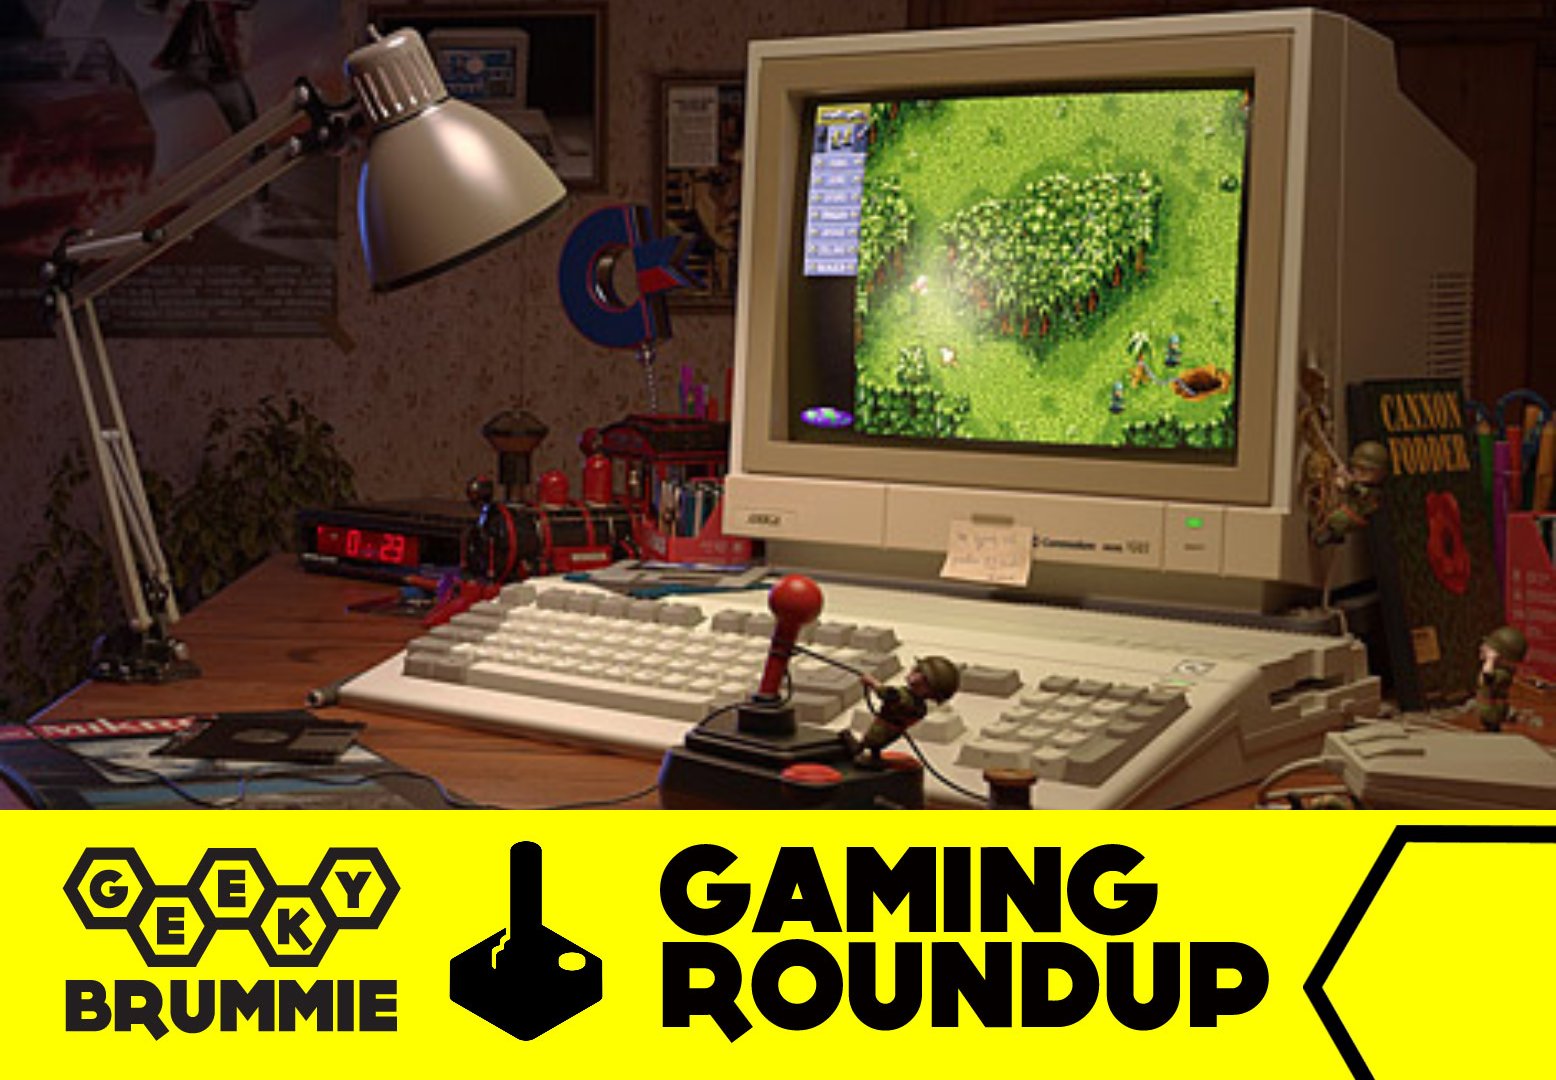 Gaming Roundup – The Amiga is Back in Mini Form